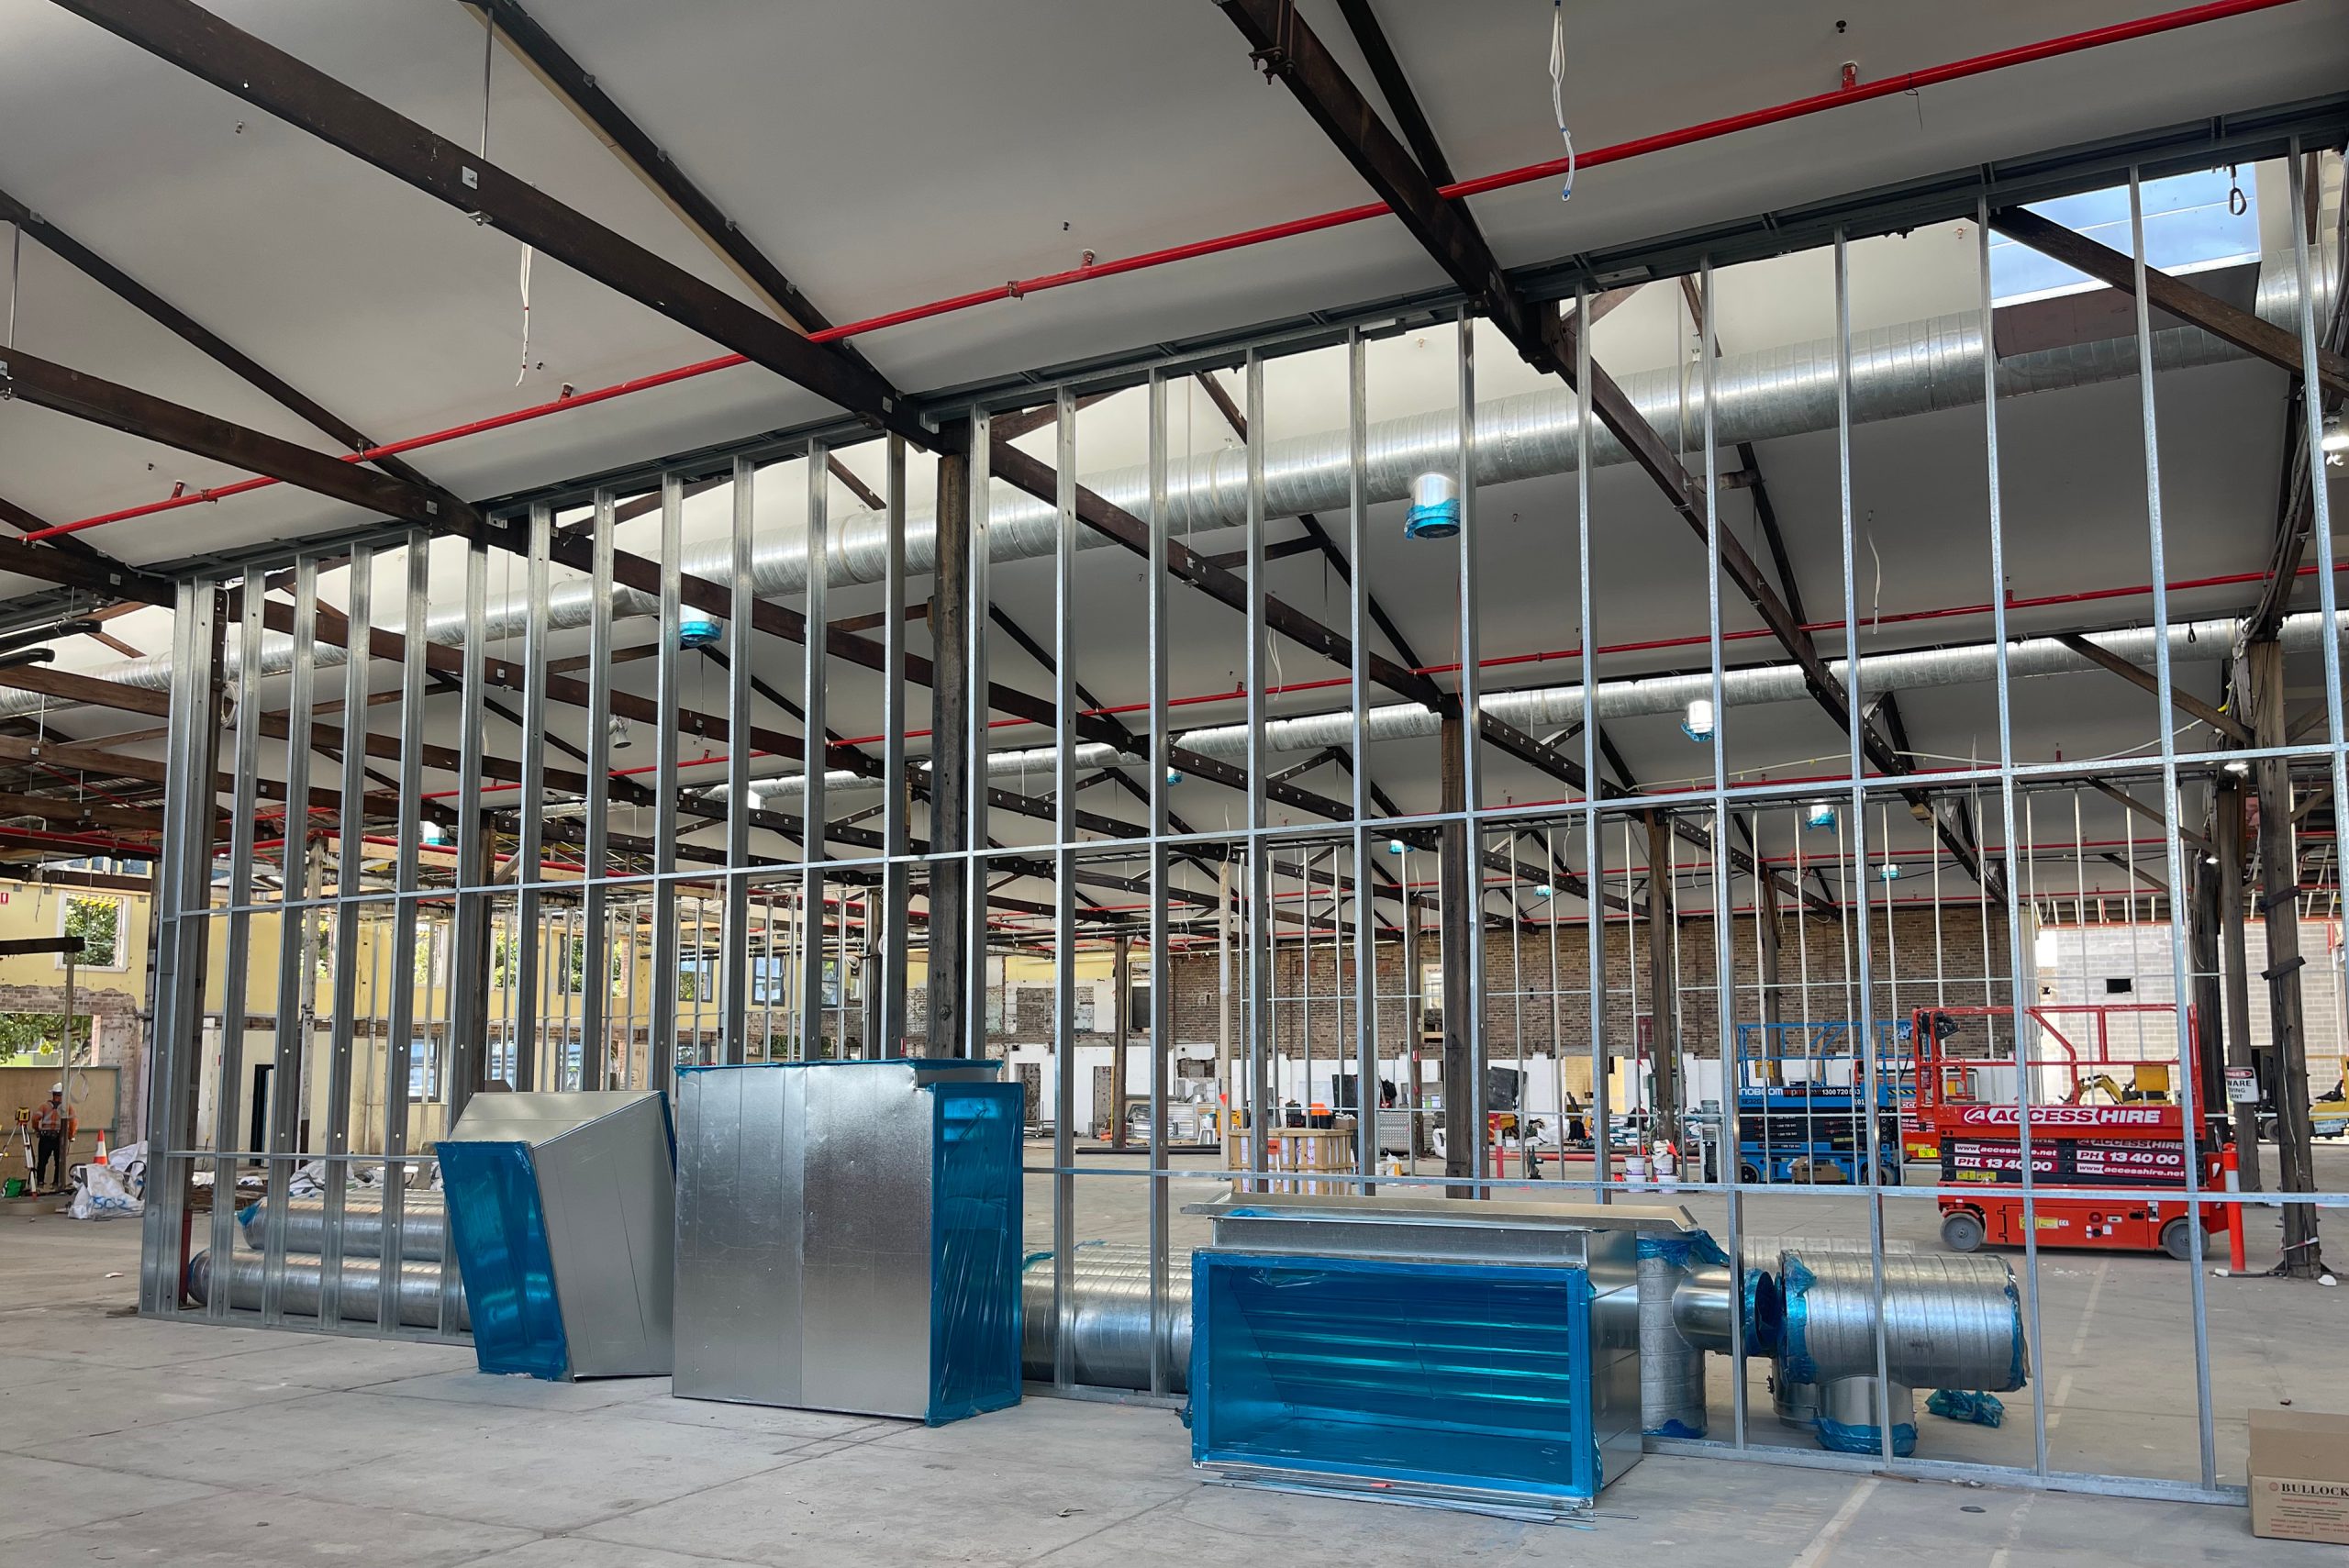 4 tenant steel entry frames rosebery engine yards project update taylor construction refurbishment and live environments